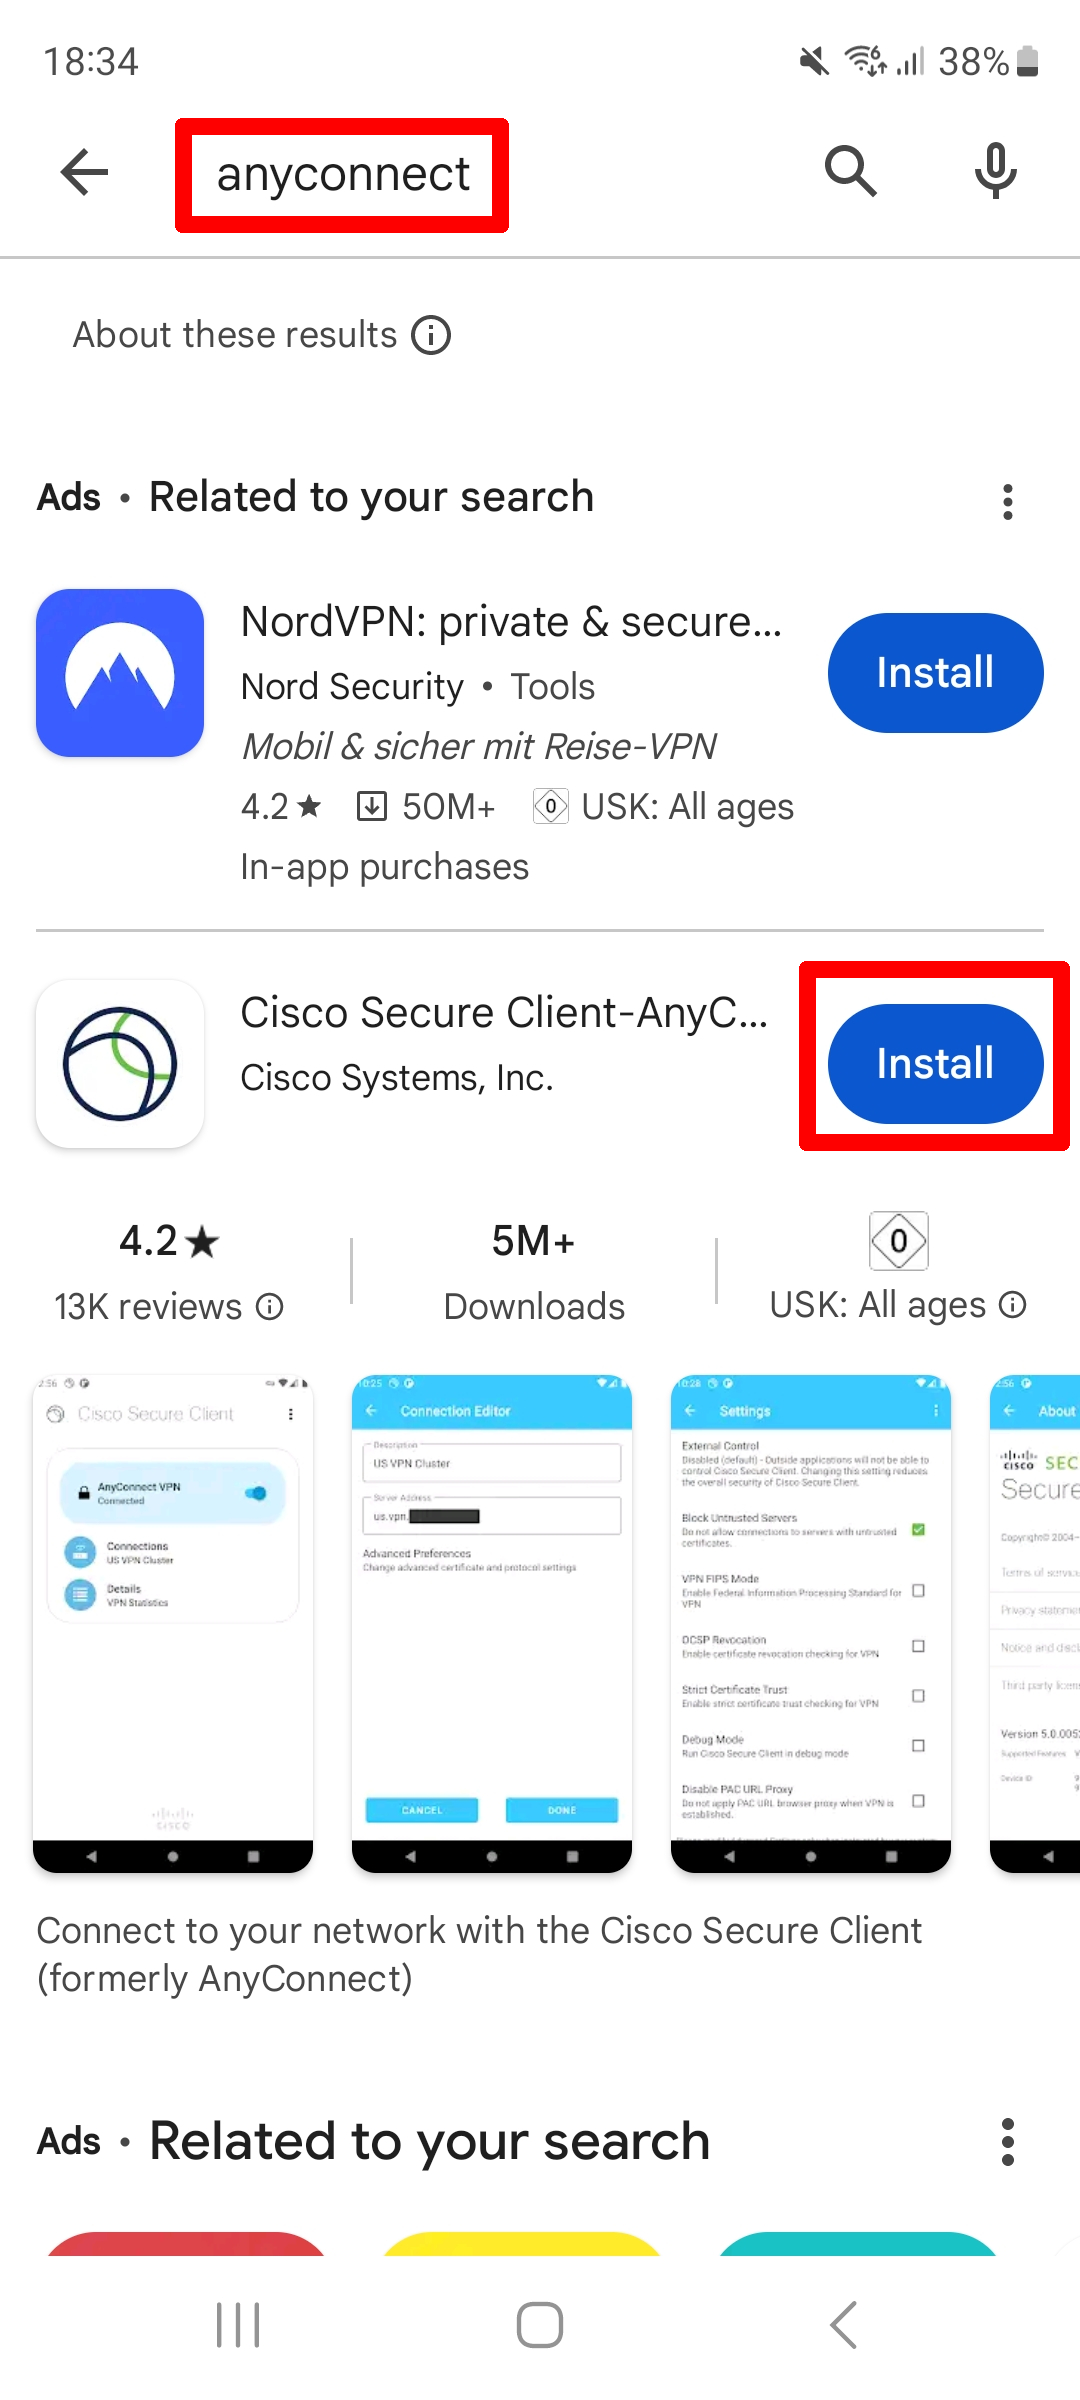 Install the Cisco Secure Client